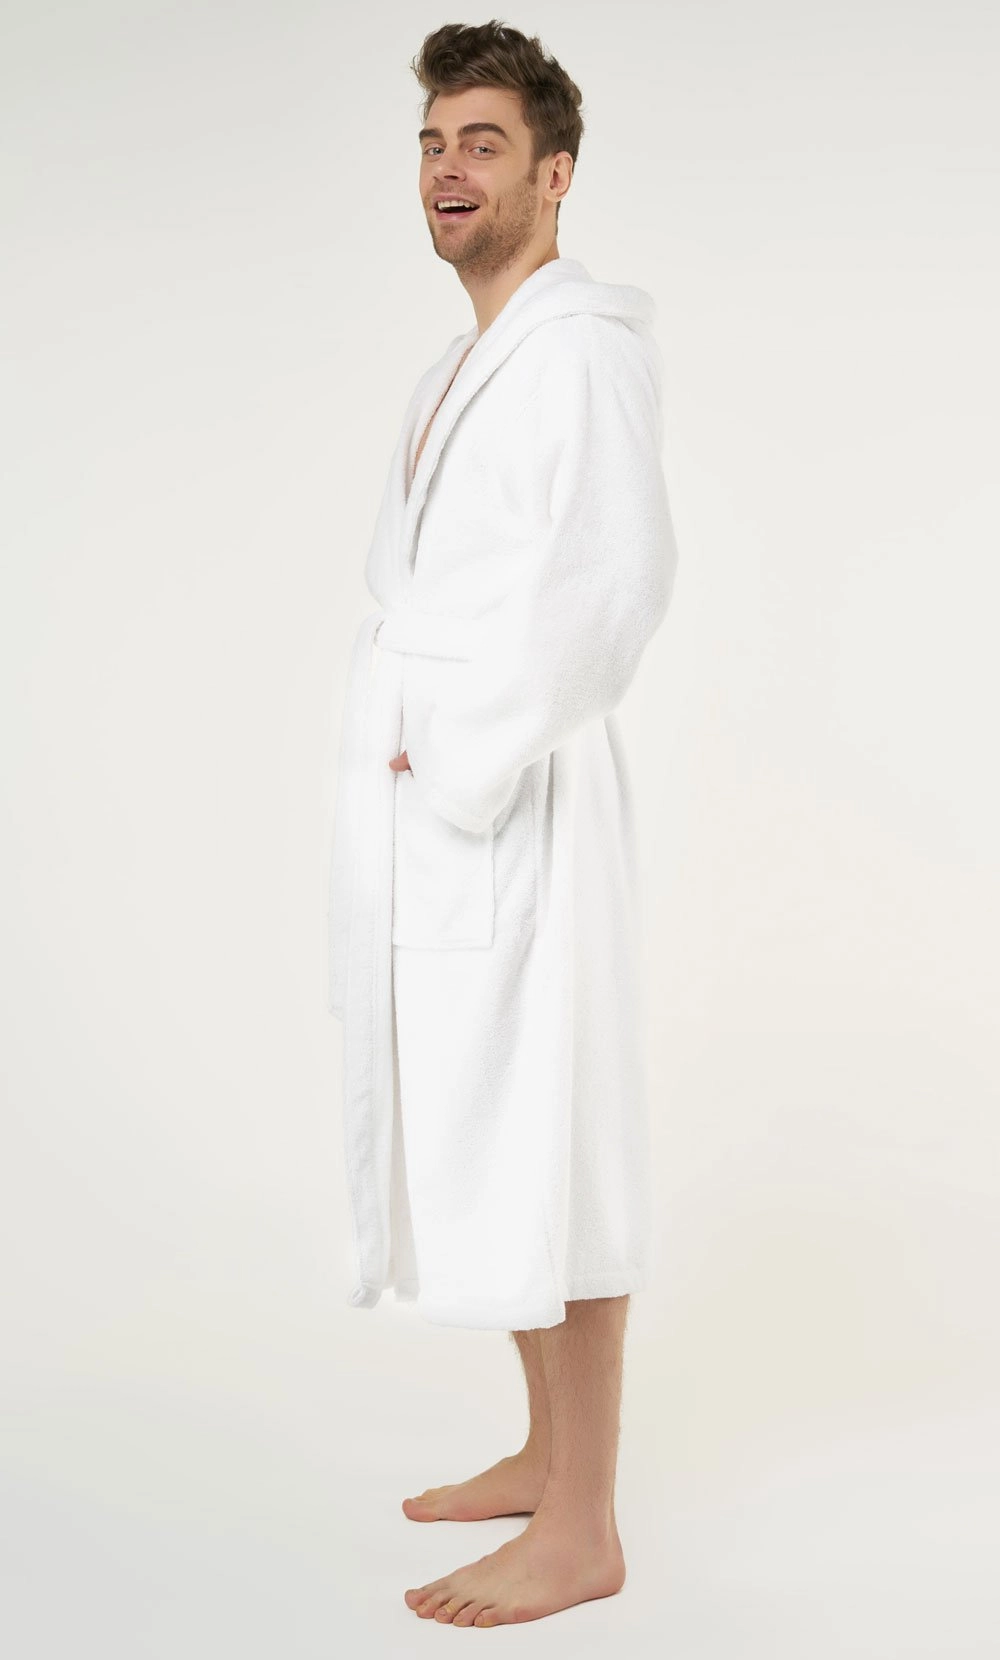 Men :: Robes :: Terry Cloth Robes :: 100% Turkish Cotton White Heavy Weight  Hooded Terry Bathrobe - Wholesale bathrobes, Spa robes, Kids robes, Cotton  robes, Spa Slippers, Wholesale Towels